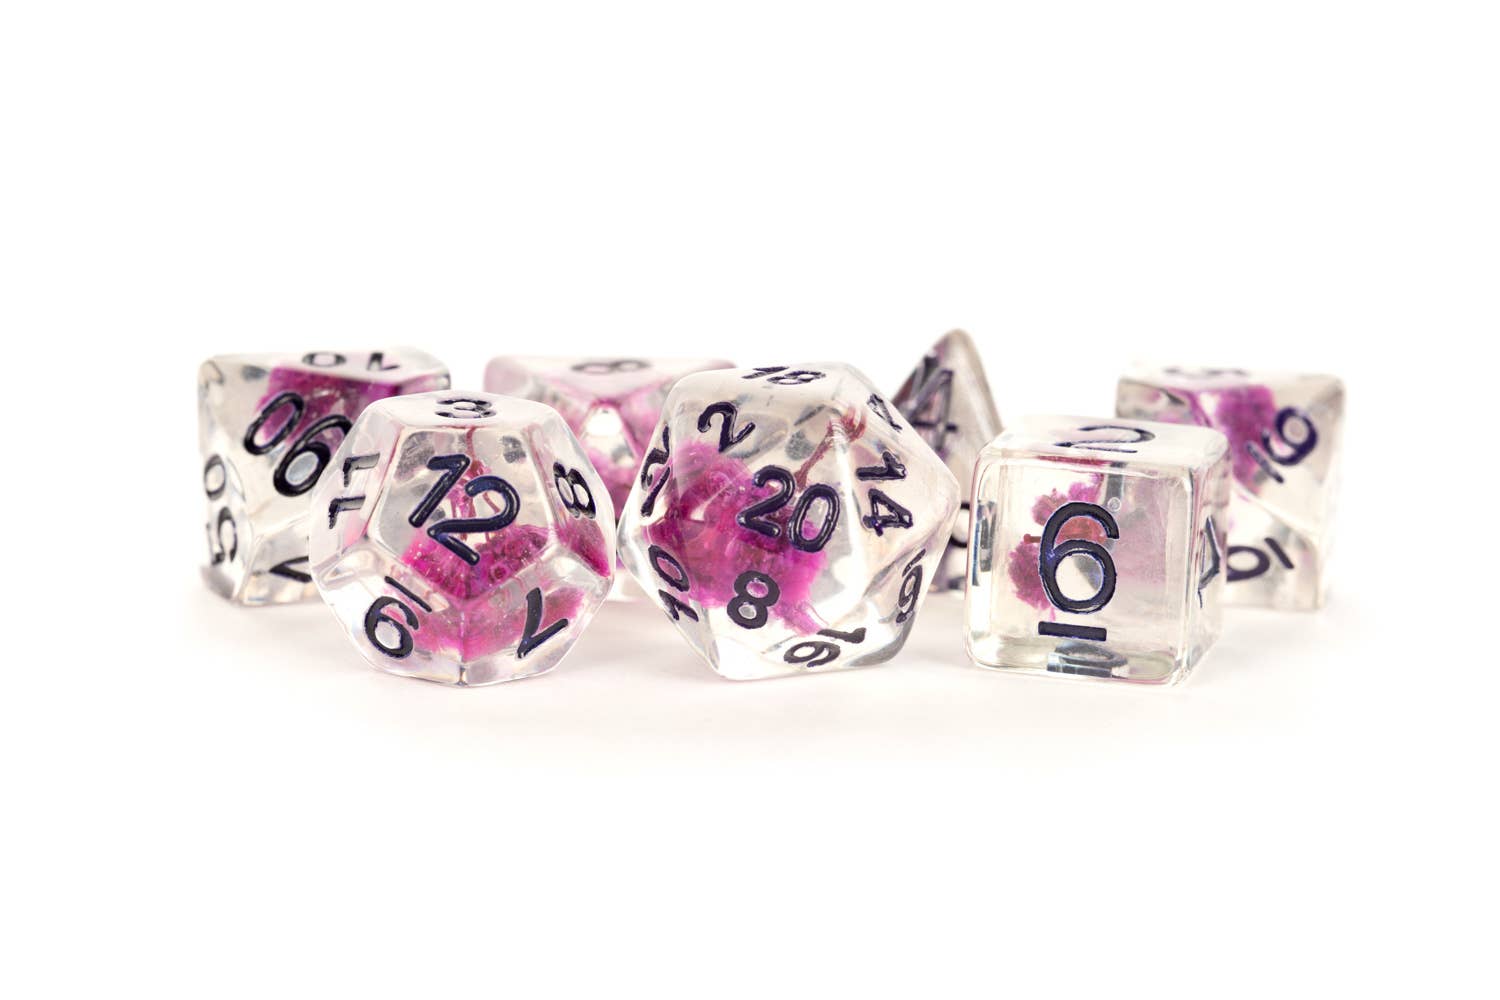 D&D Resin Inclusion Dice: Choose your Style!